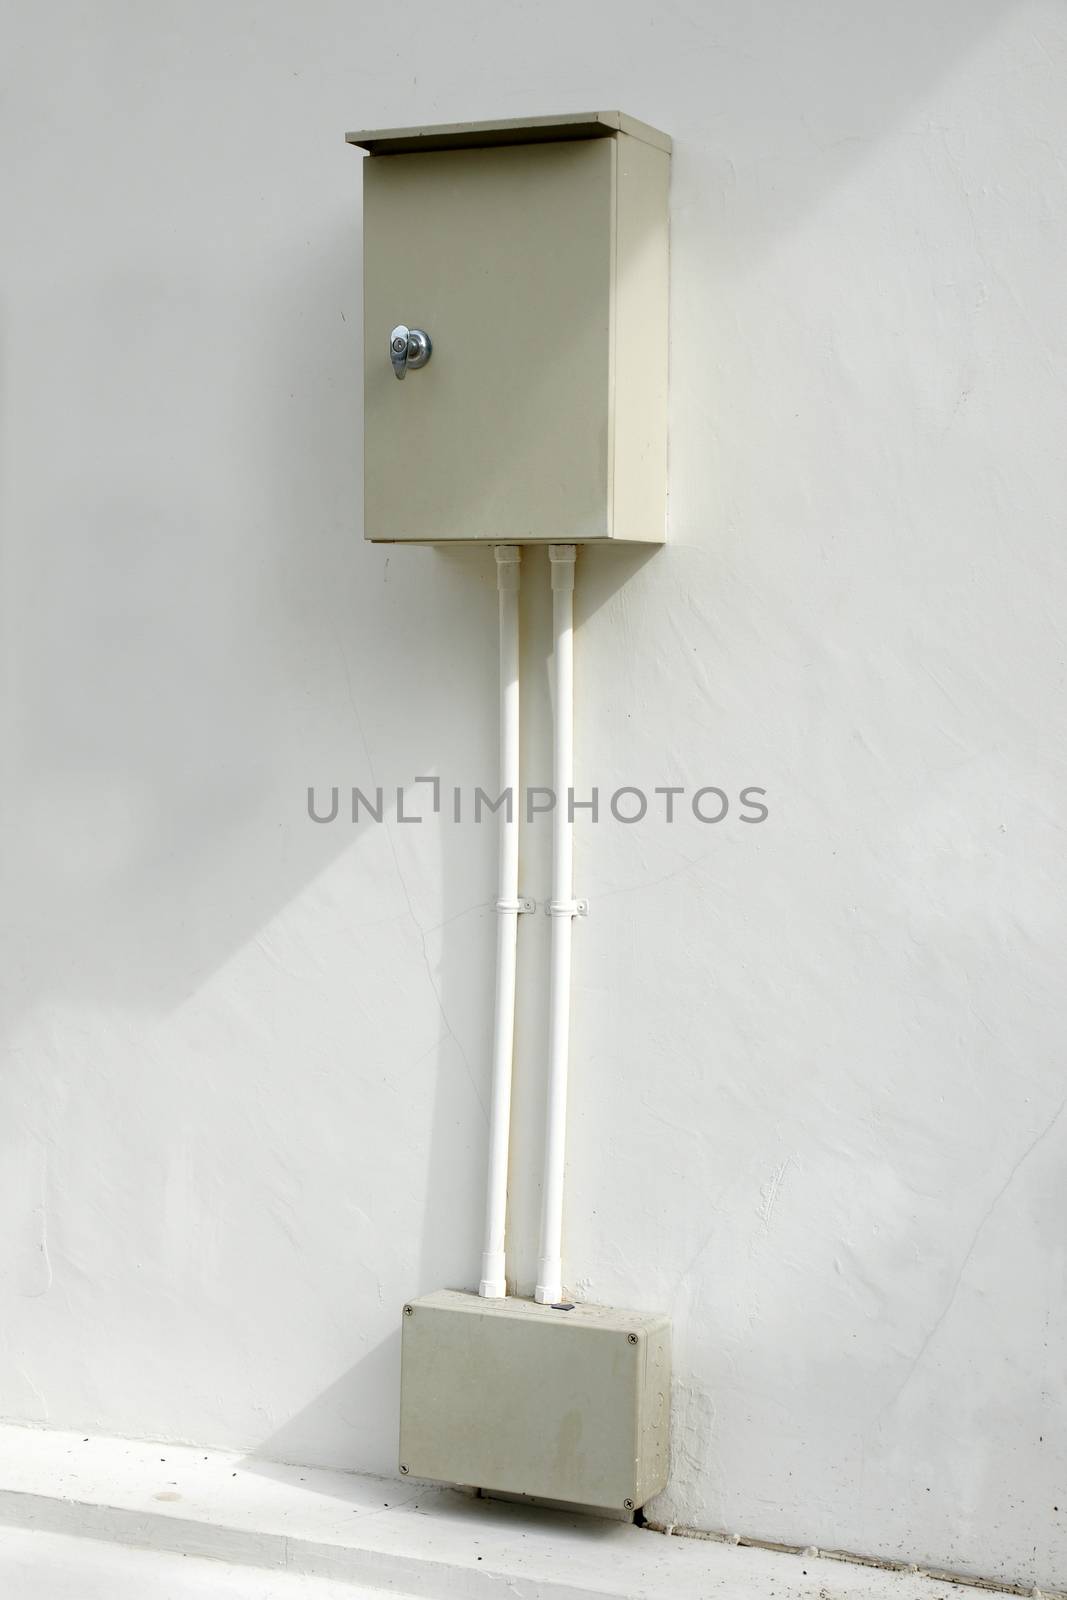 Safety outdoor electric connector box mounted on the wall by mranucha